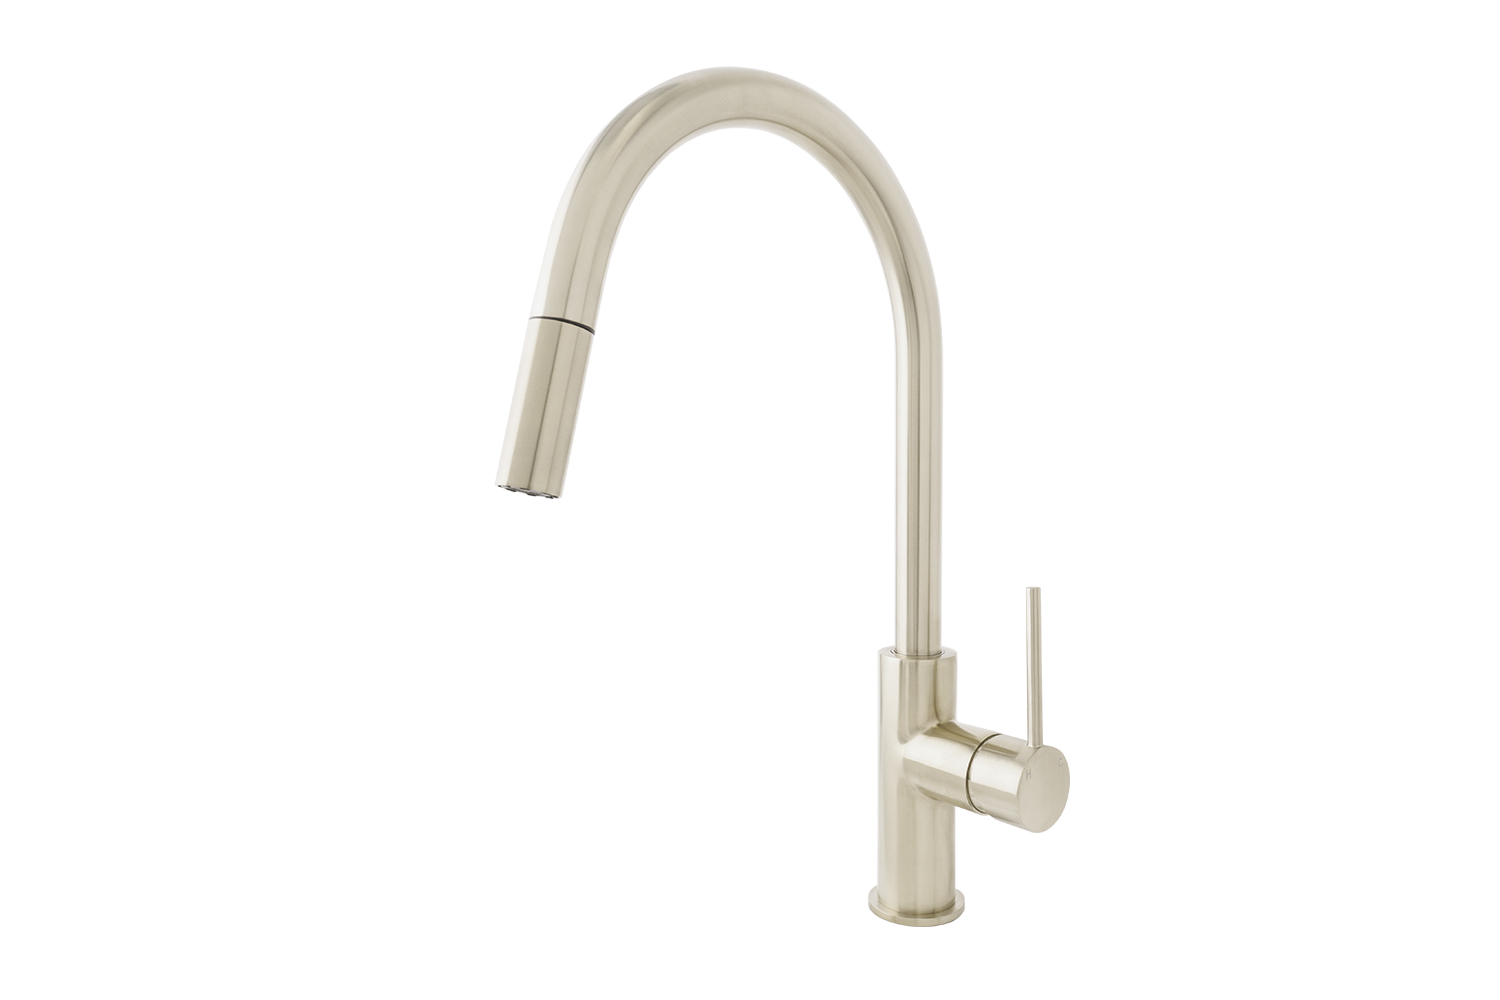 Bloom Pull Out Sink Mixer Warm Brushed Nickel